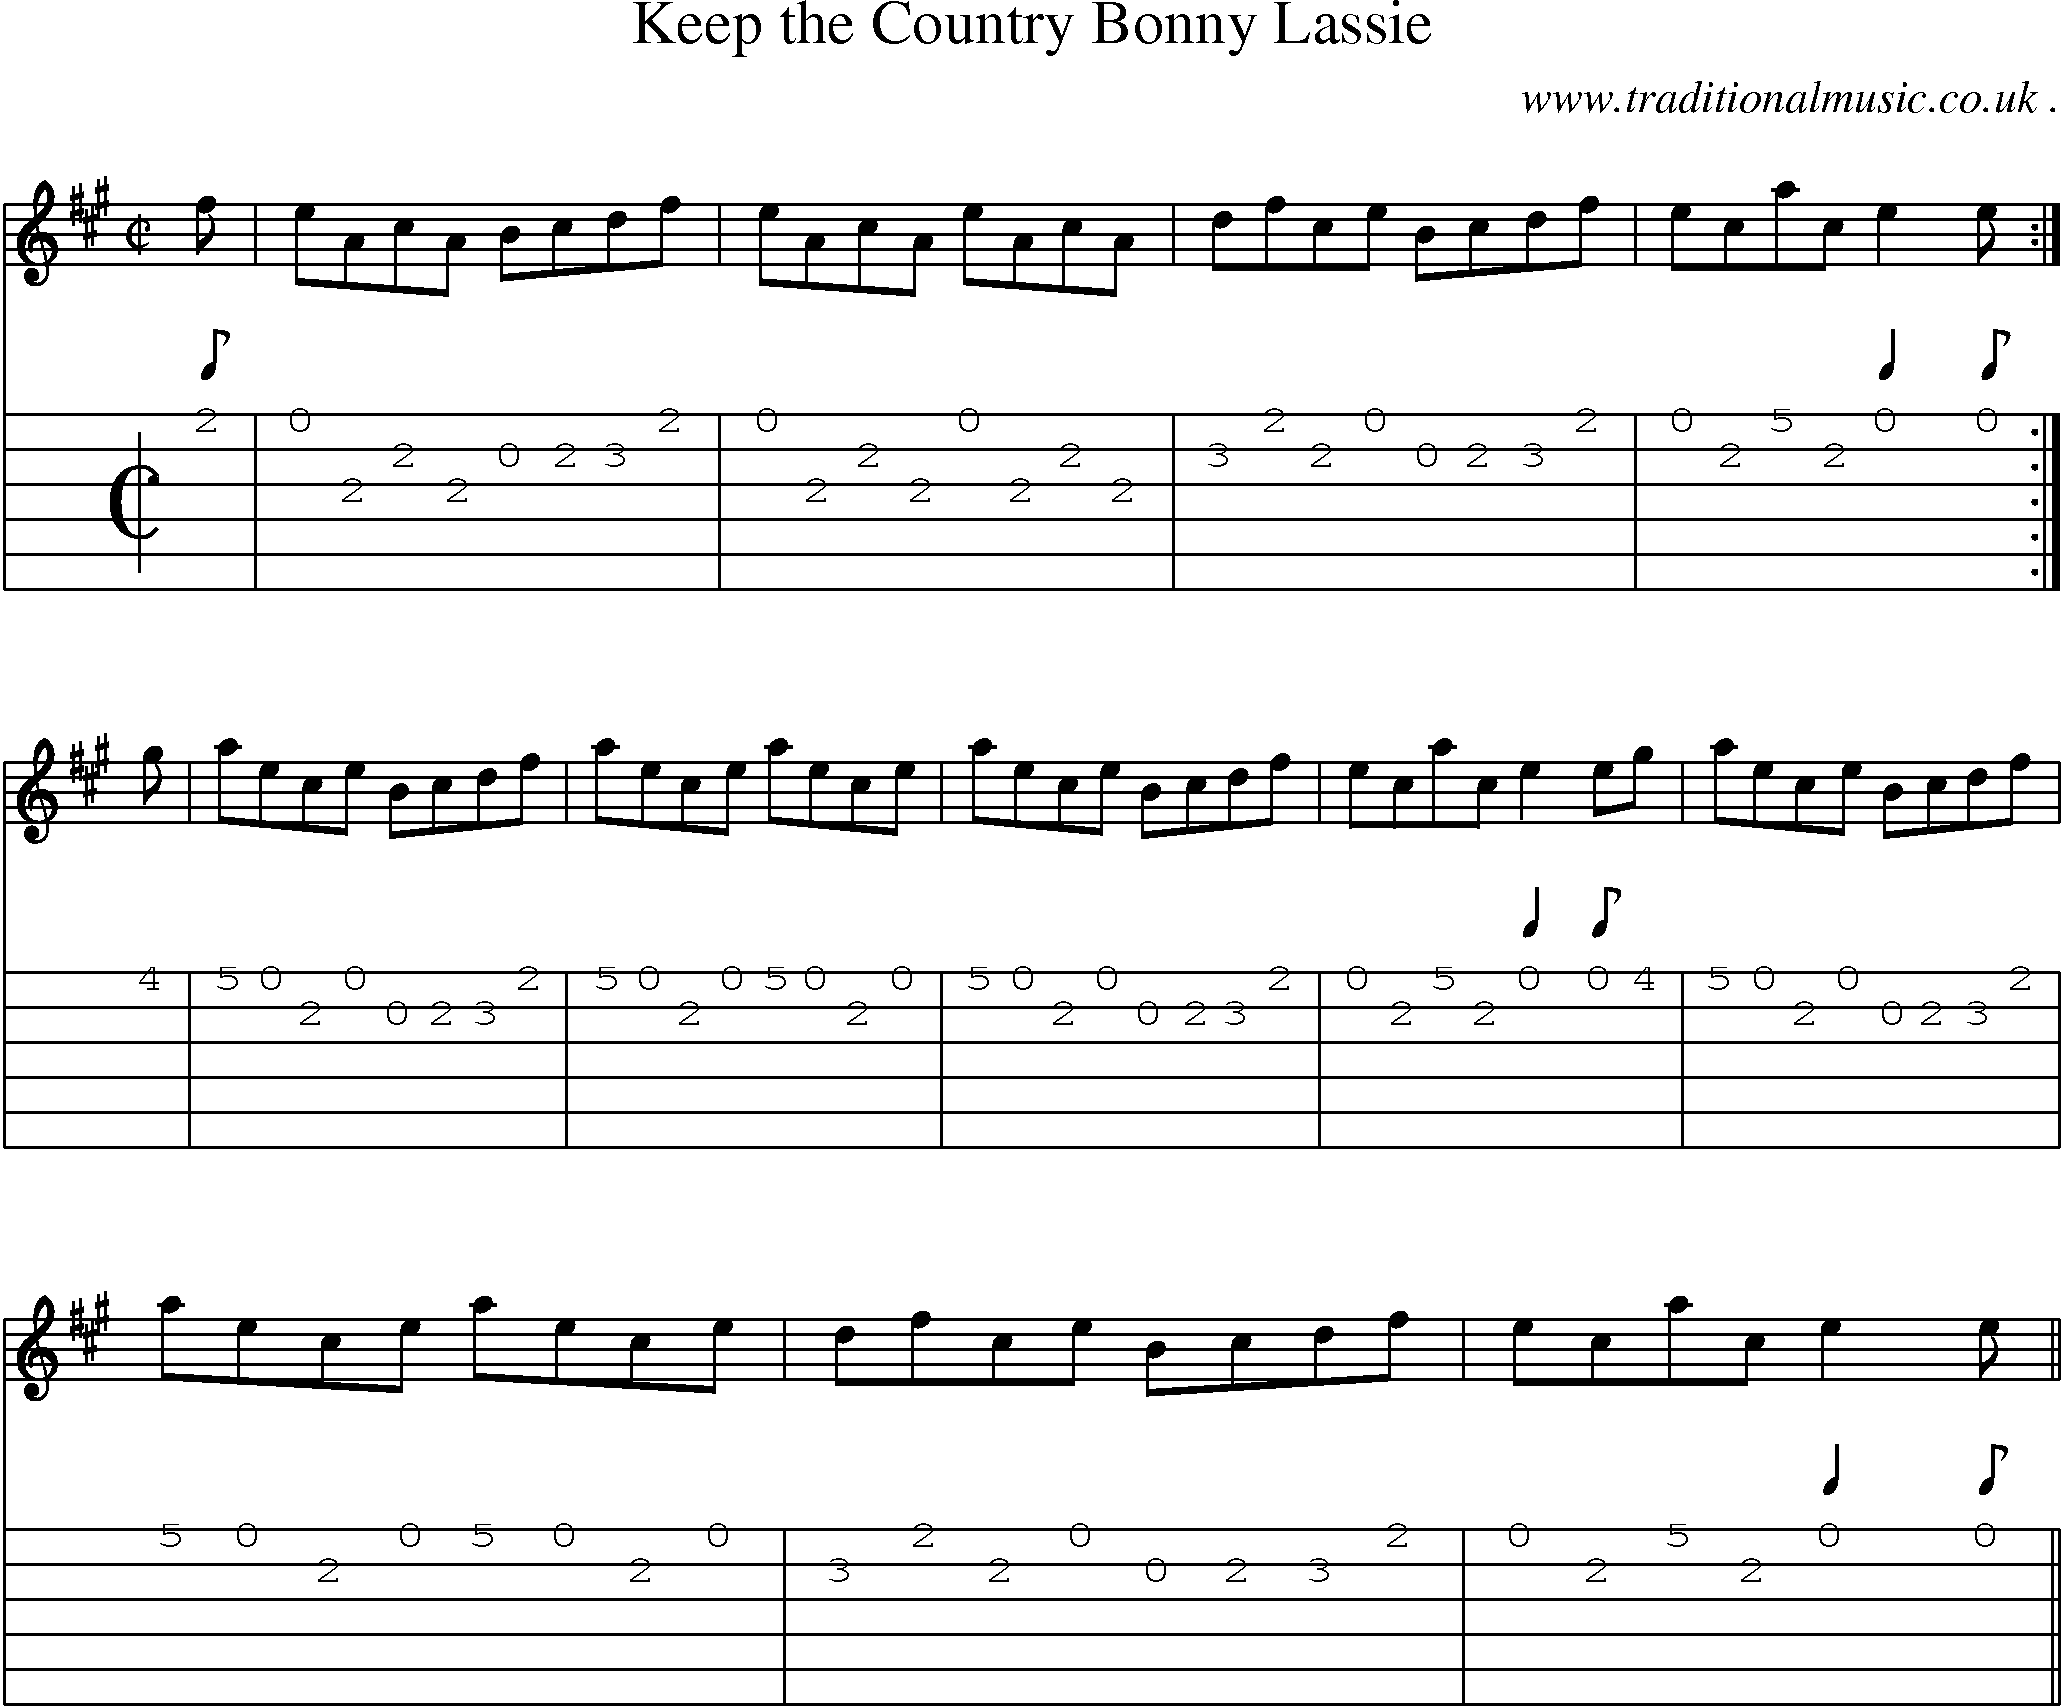 Sheet-music  score, Chords and Guitar Tabs for Keep The Country Bonny Lassie